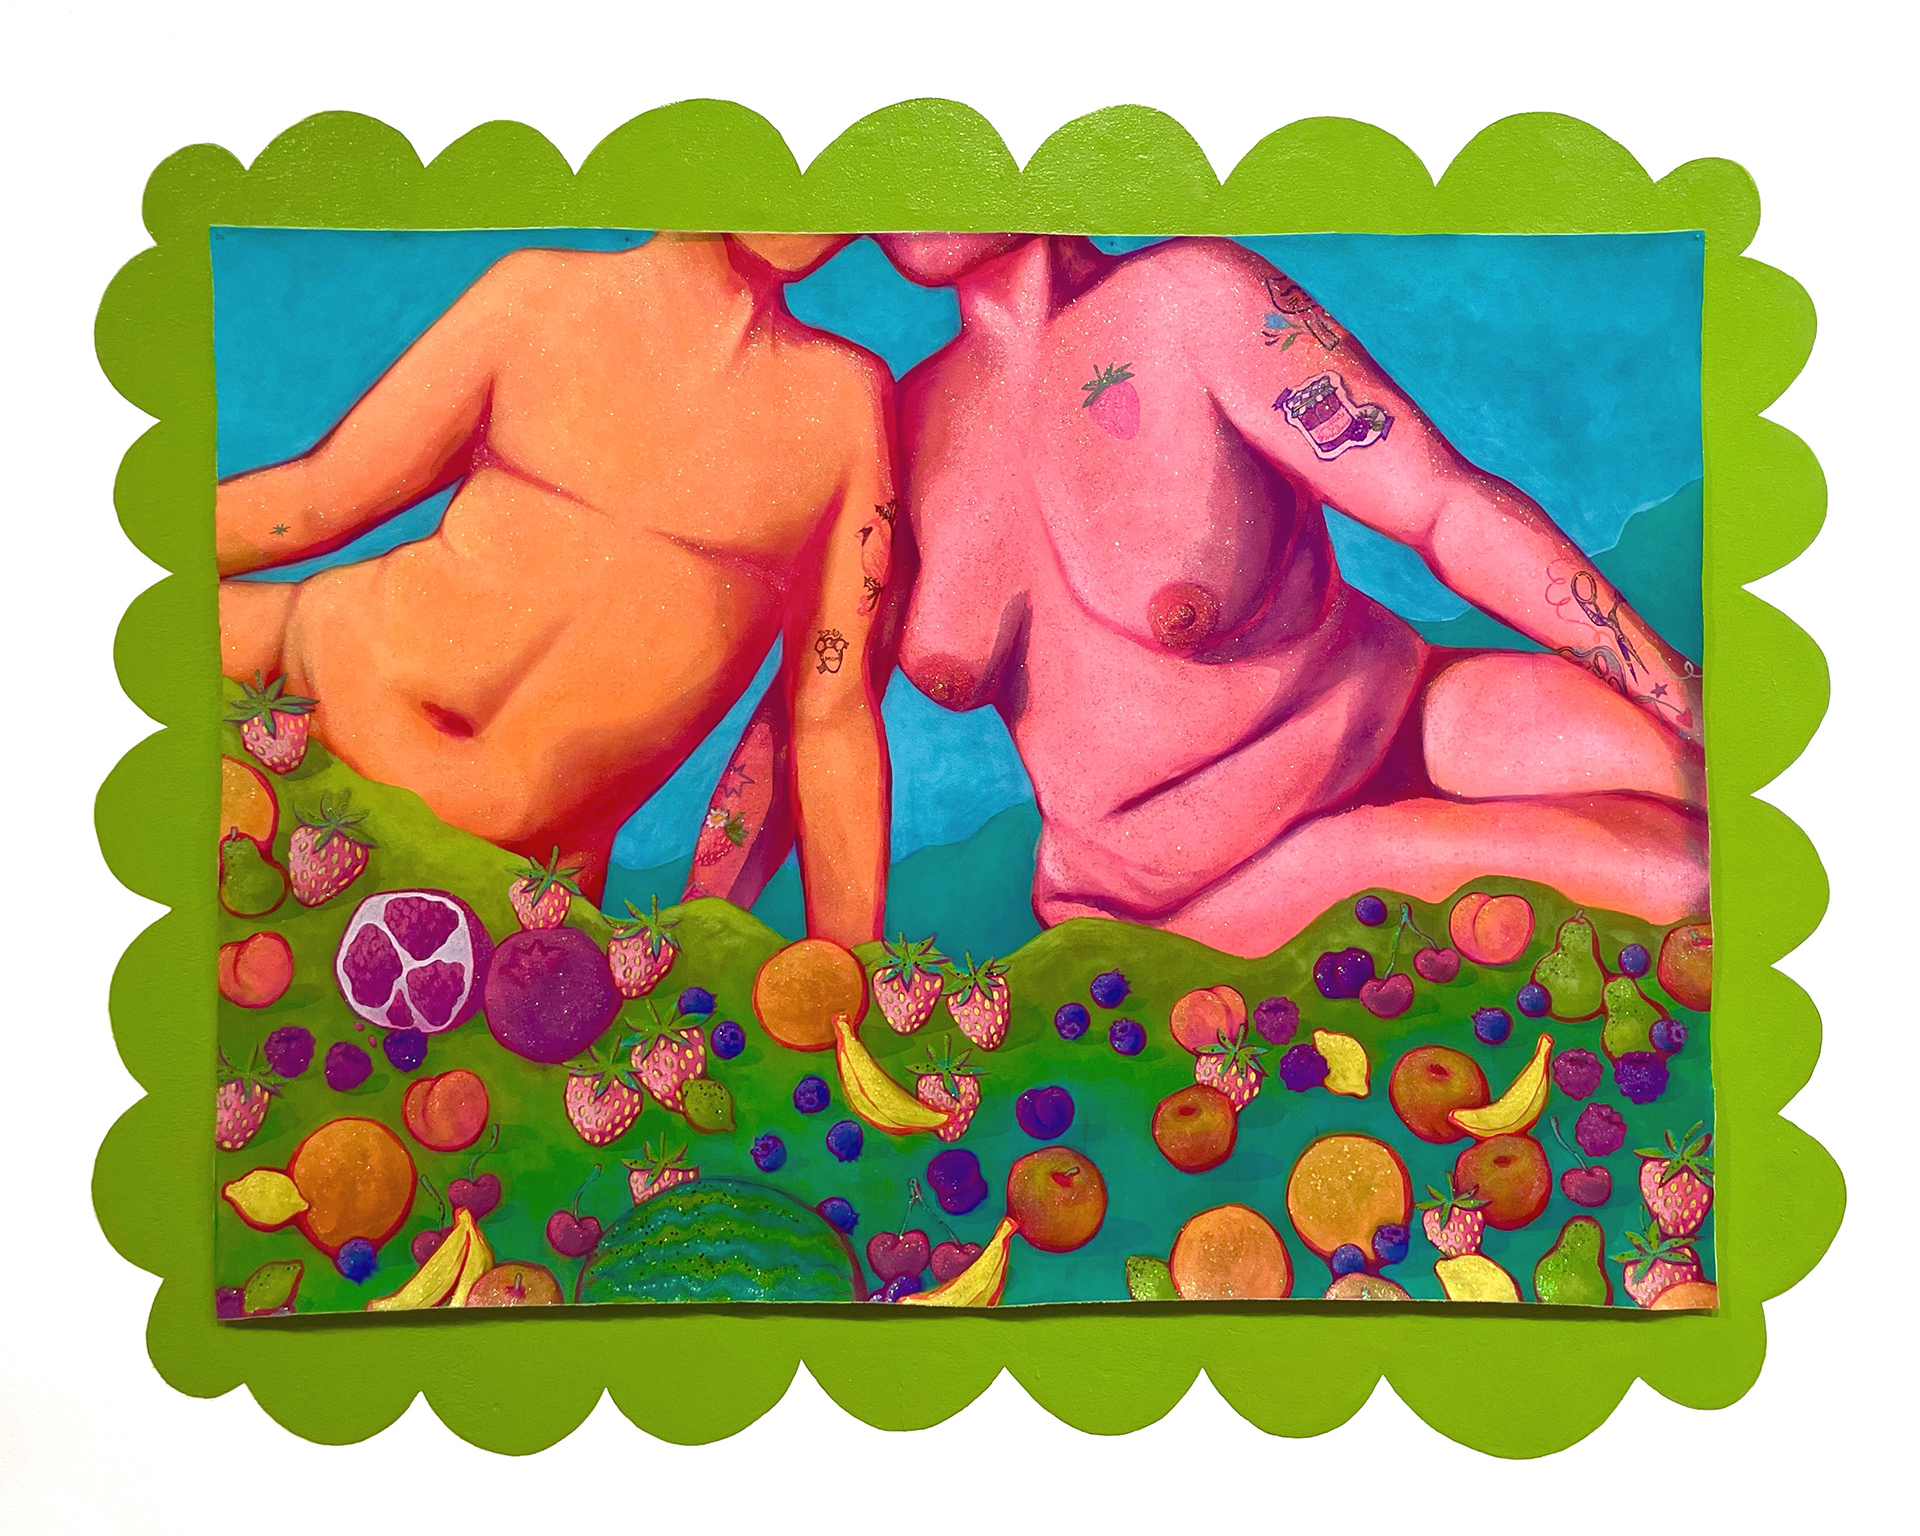 Two reclining nude figures in orange and pink sit in the background of a foreground of a rolling hill of fruit lying upon the ground. The scene is surrounded by a lime green scalloped frame painted on the wall.